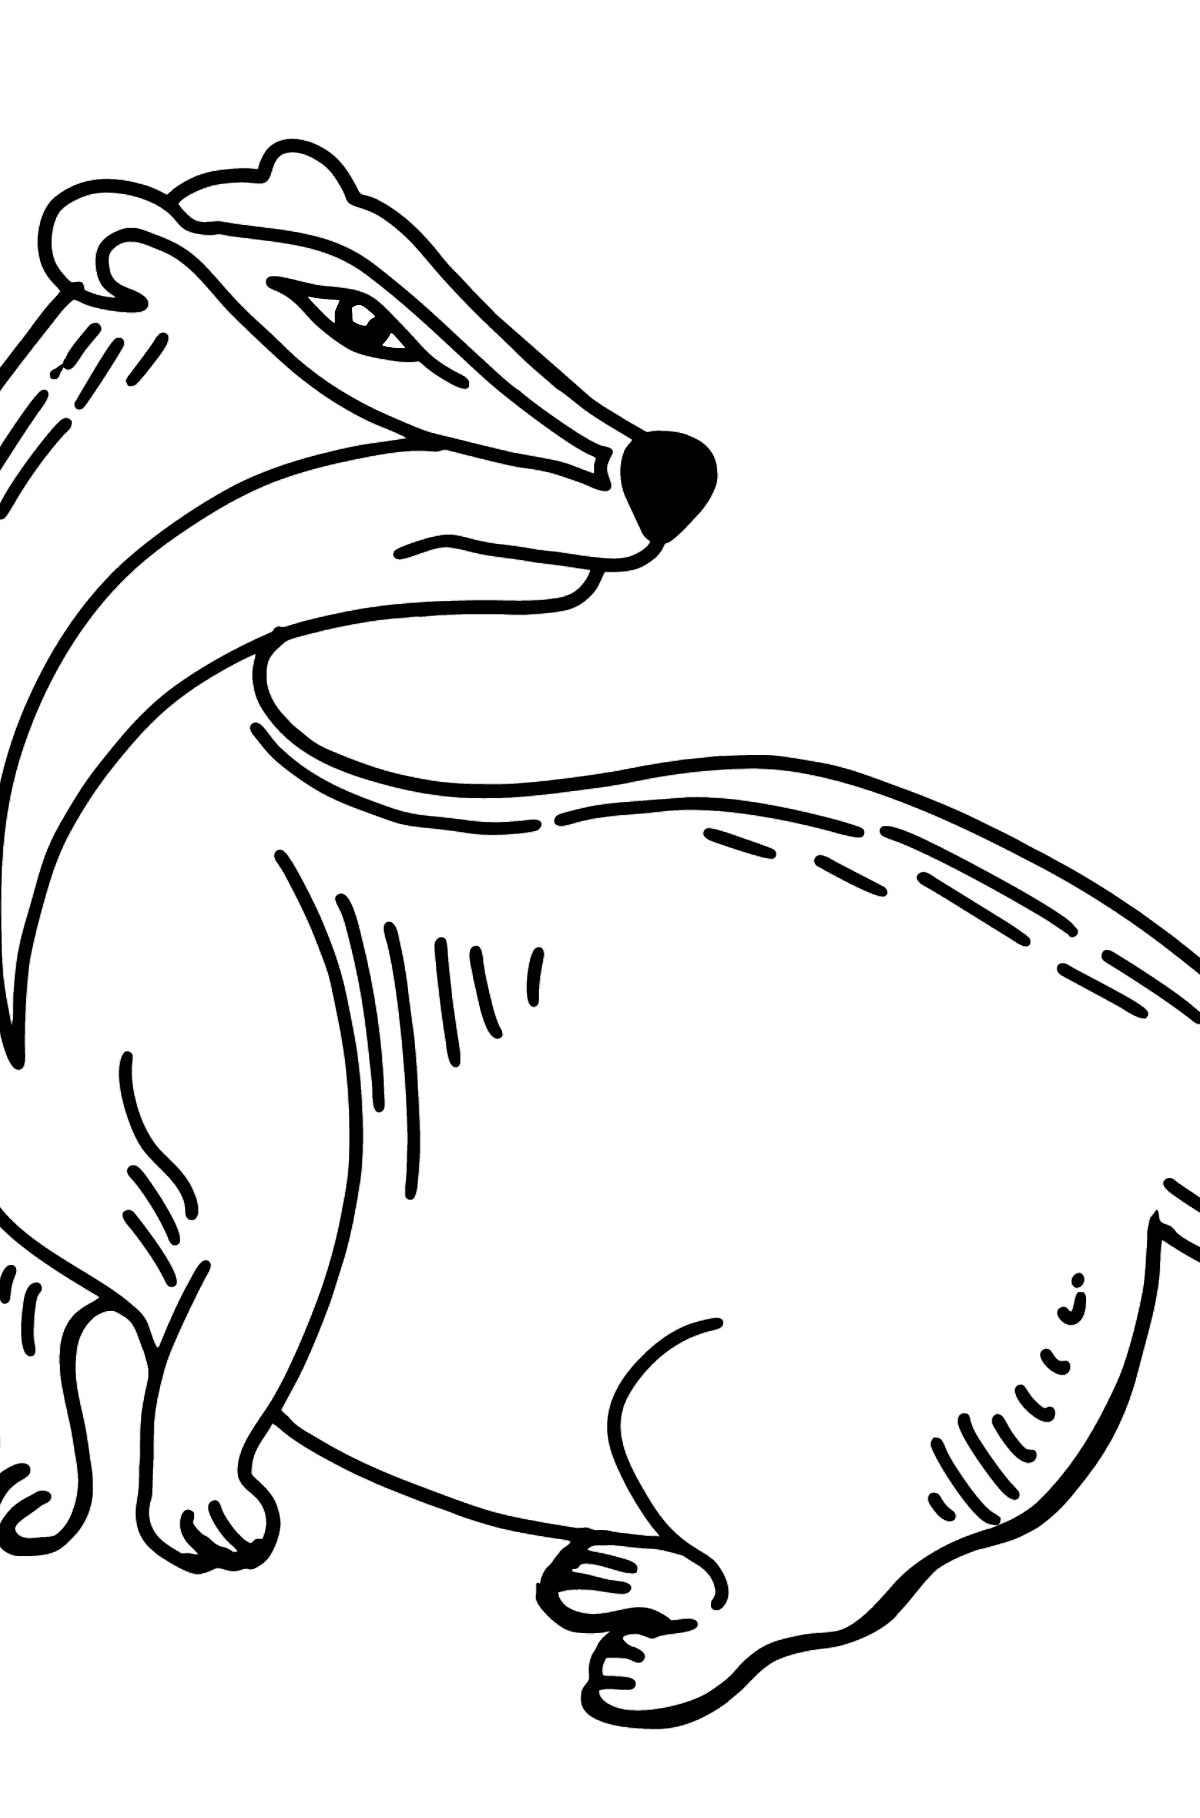 Badger coloring page - Coloring Pages for Kids